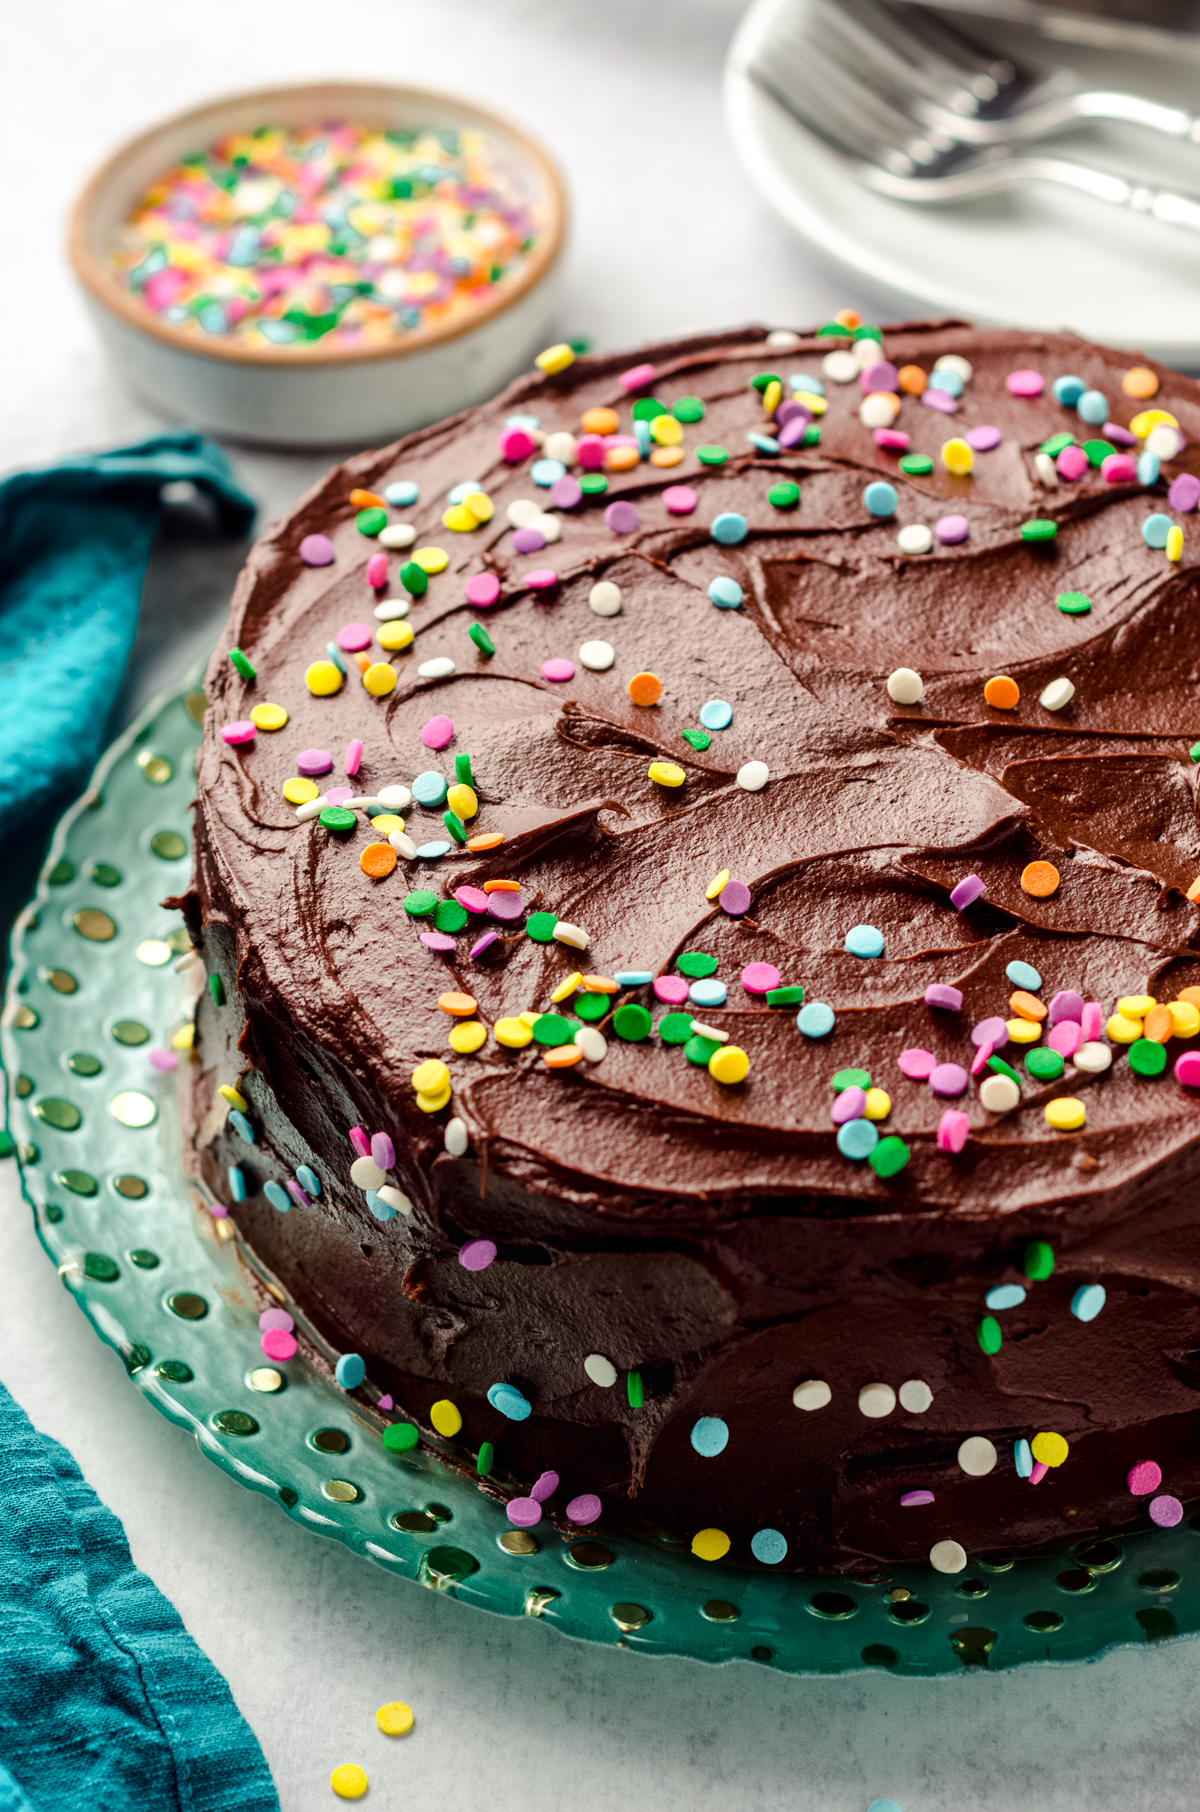 Yellow cake with chocolate frosting and rainbow confetti quins on a plate.